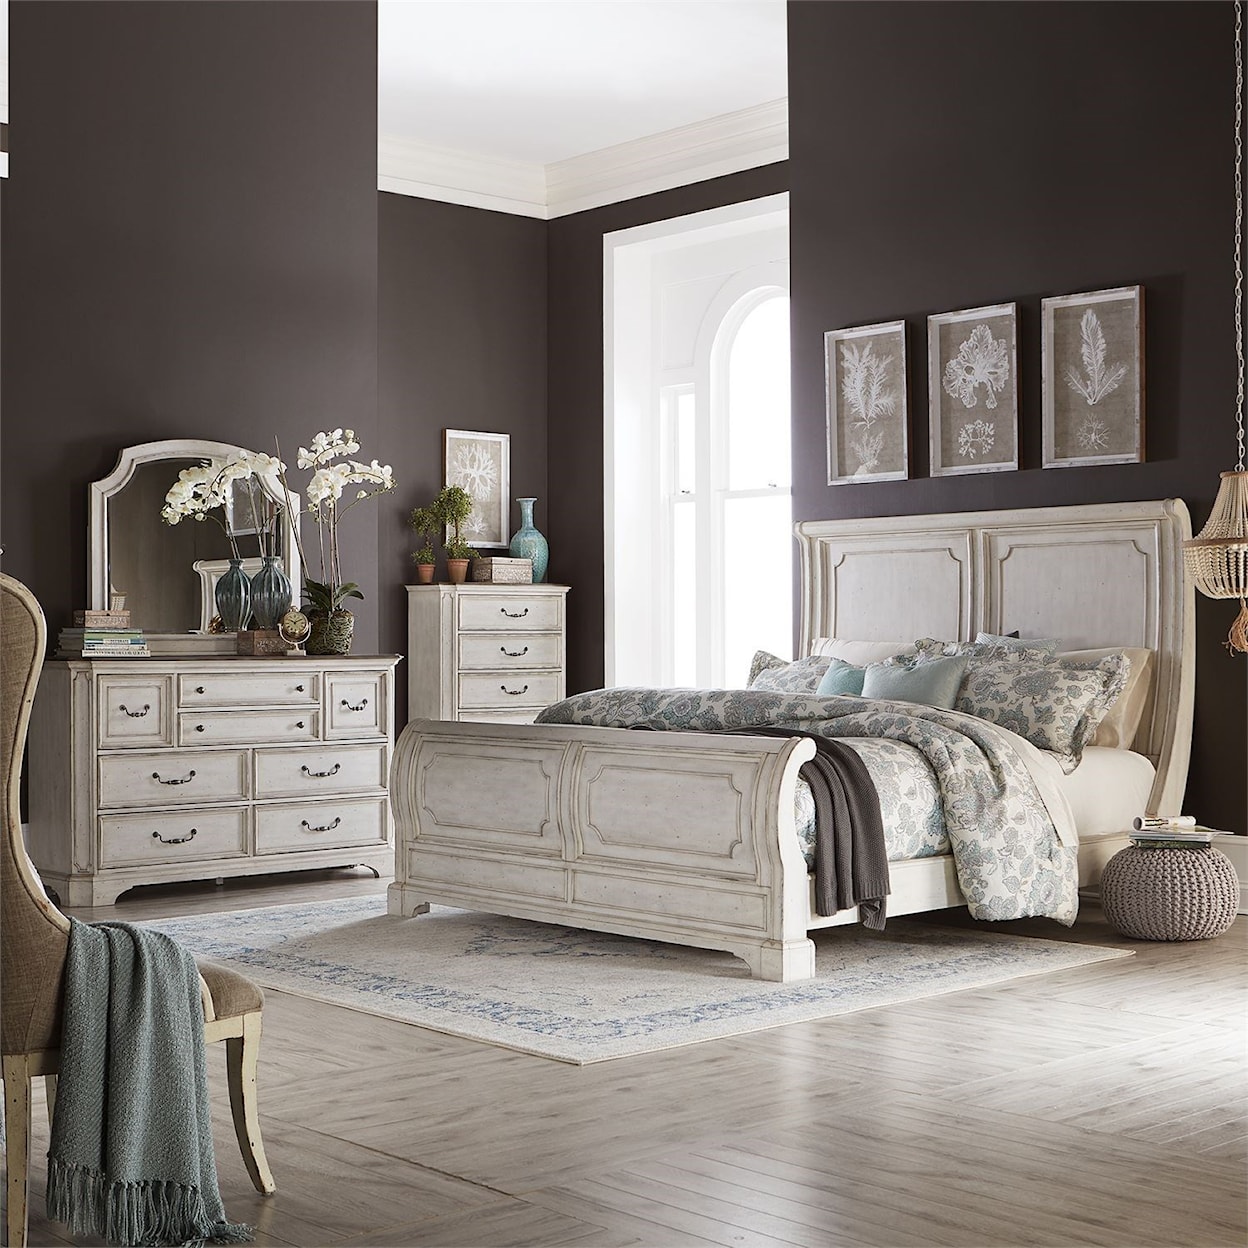 Liberty Furniture Abbey Road Queen Bedroom Group